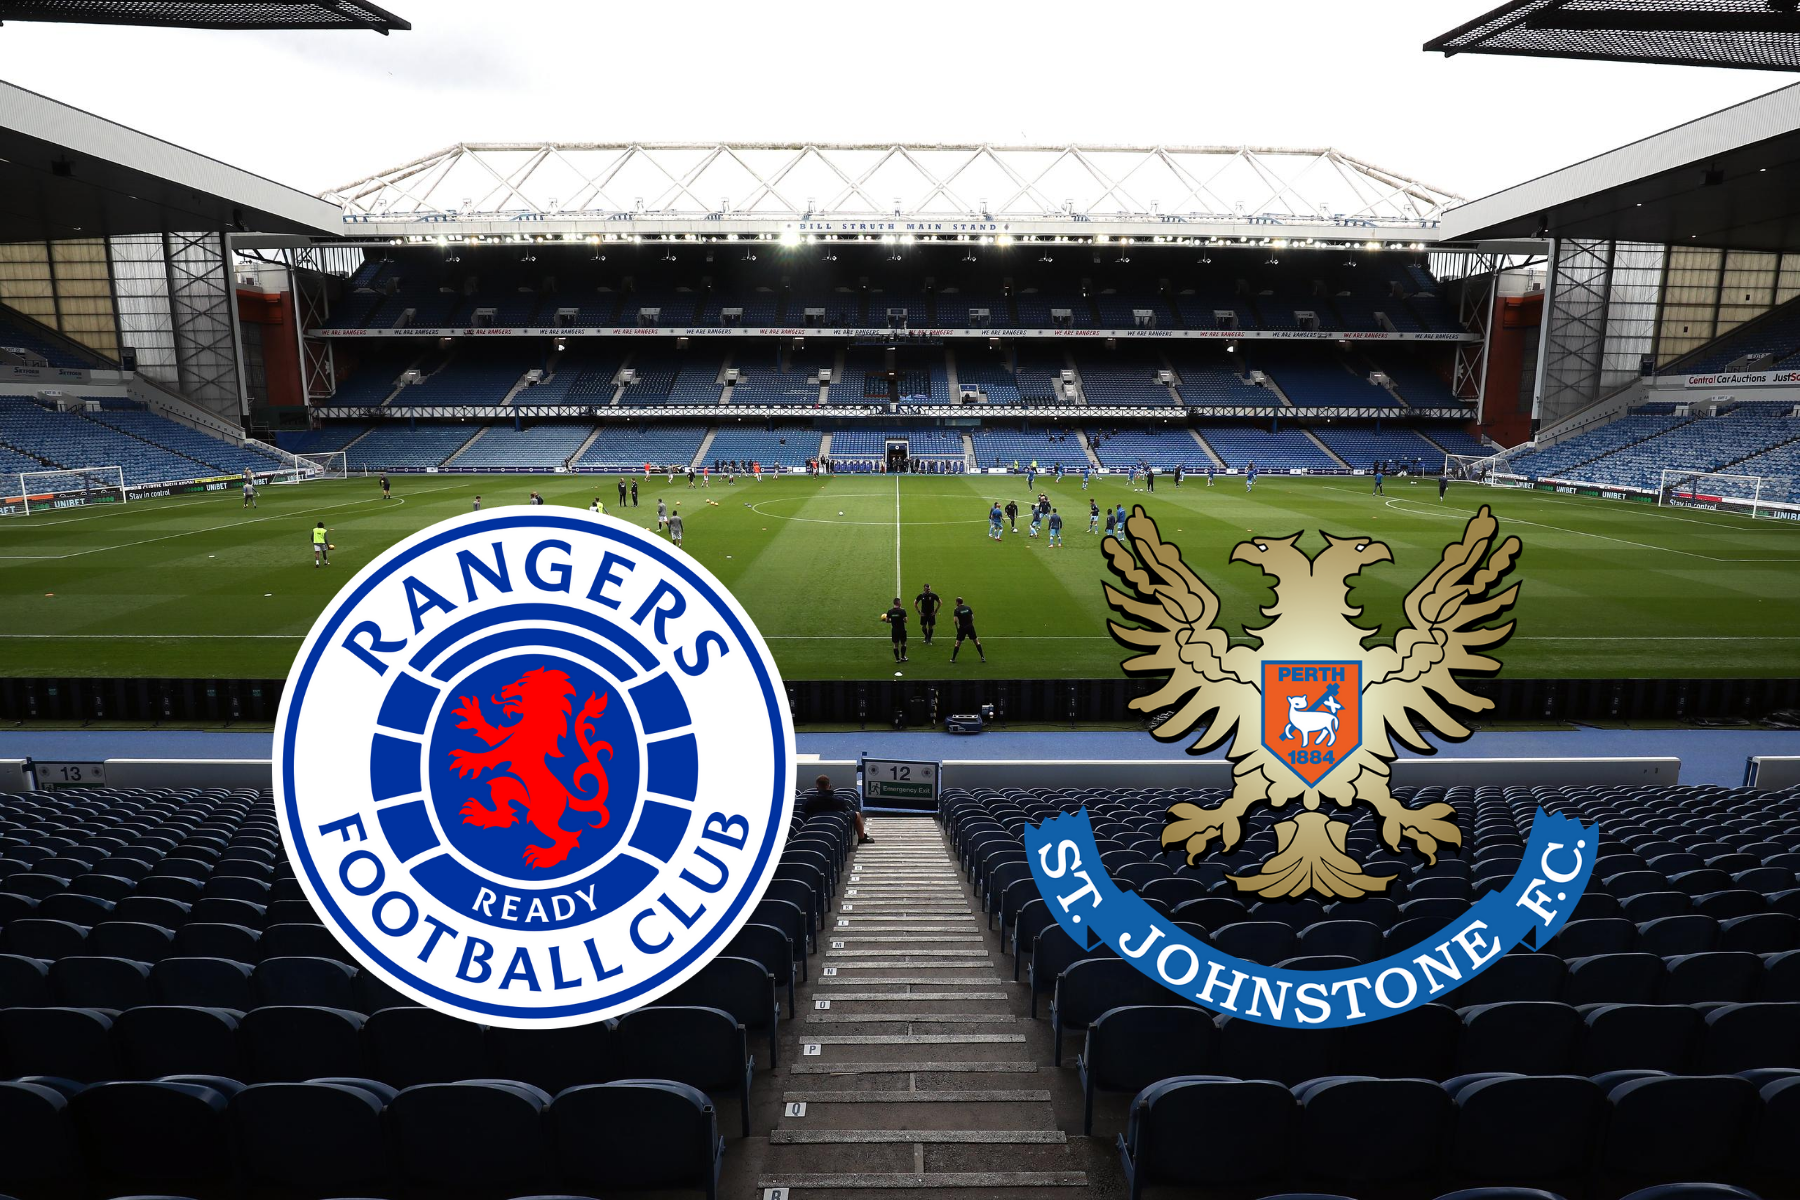 Rangers 0 St Johnstone 0 LIVE: Goal and match updates from Scottish Premiership clash at Ibrox